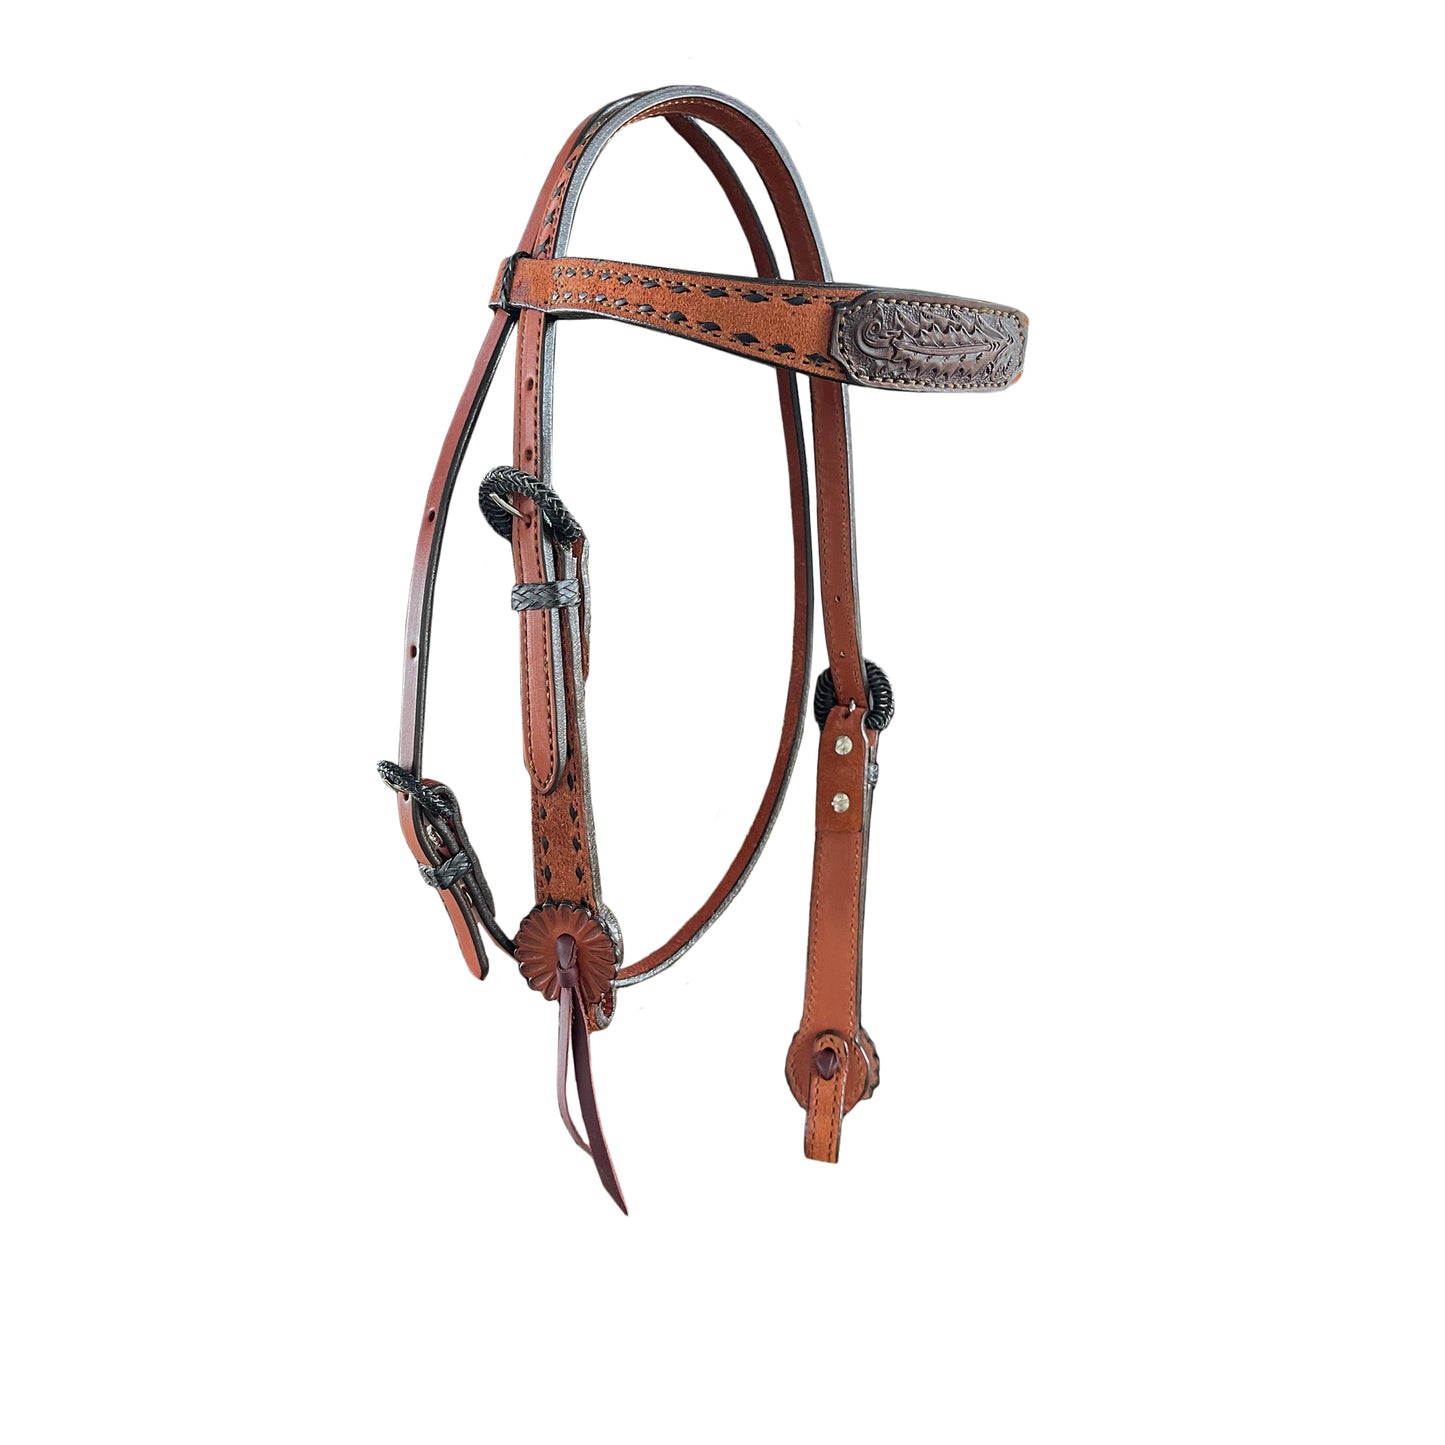 1-1/2" Contour browband headstall rough out toast leather with chocolate oak leaf tooled patch, black buckstitch, braided loops, and Spanish lace hardware.